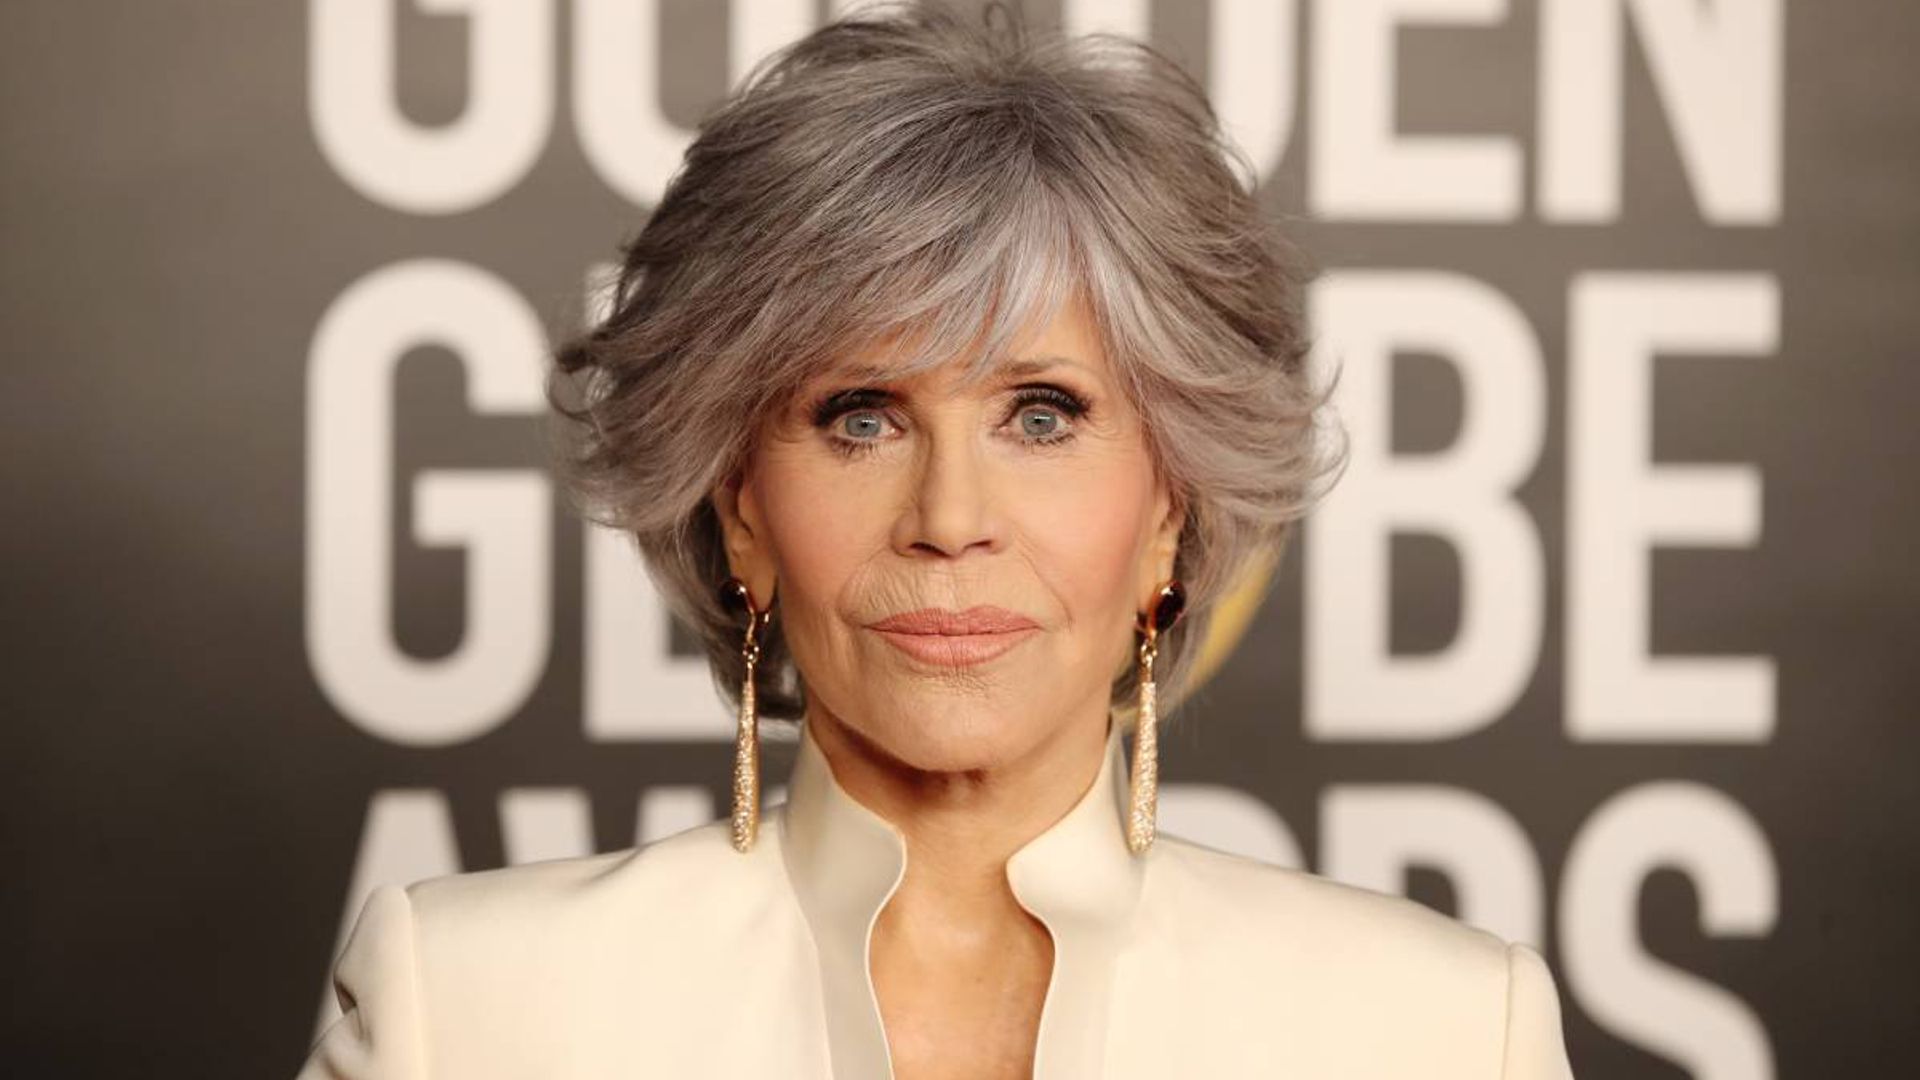 Jane Fonda looks astonishing with bold new look - and it's so different